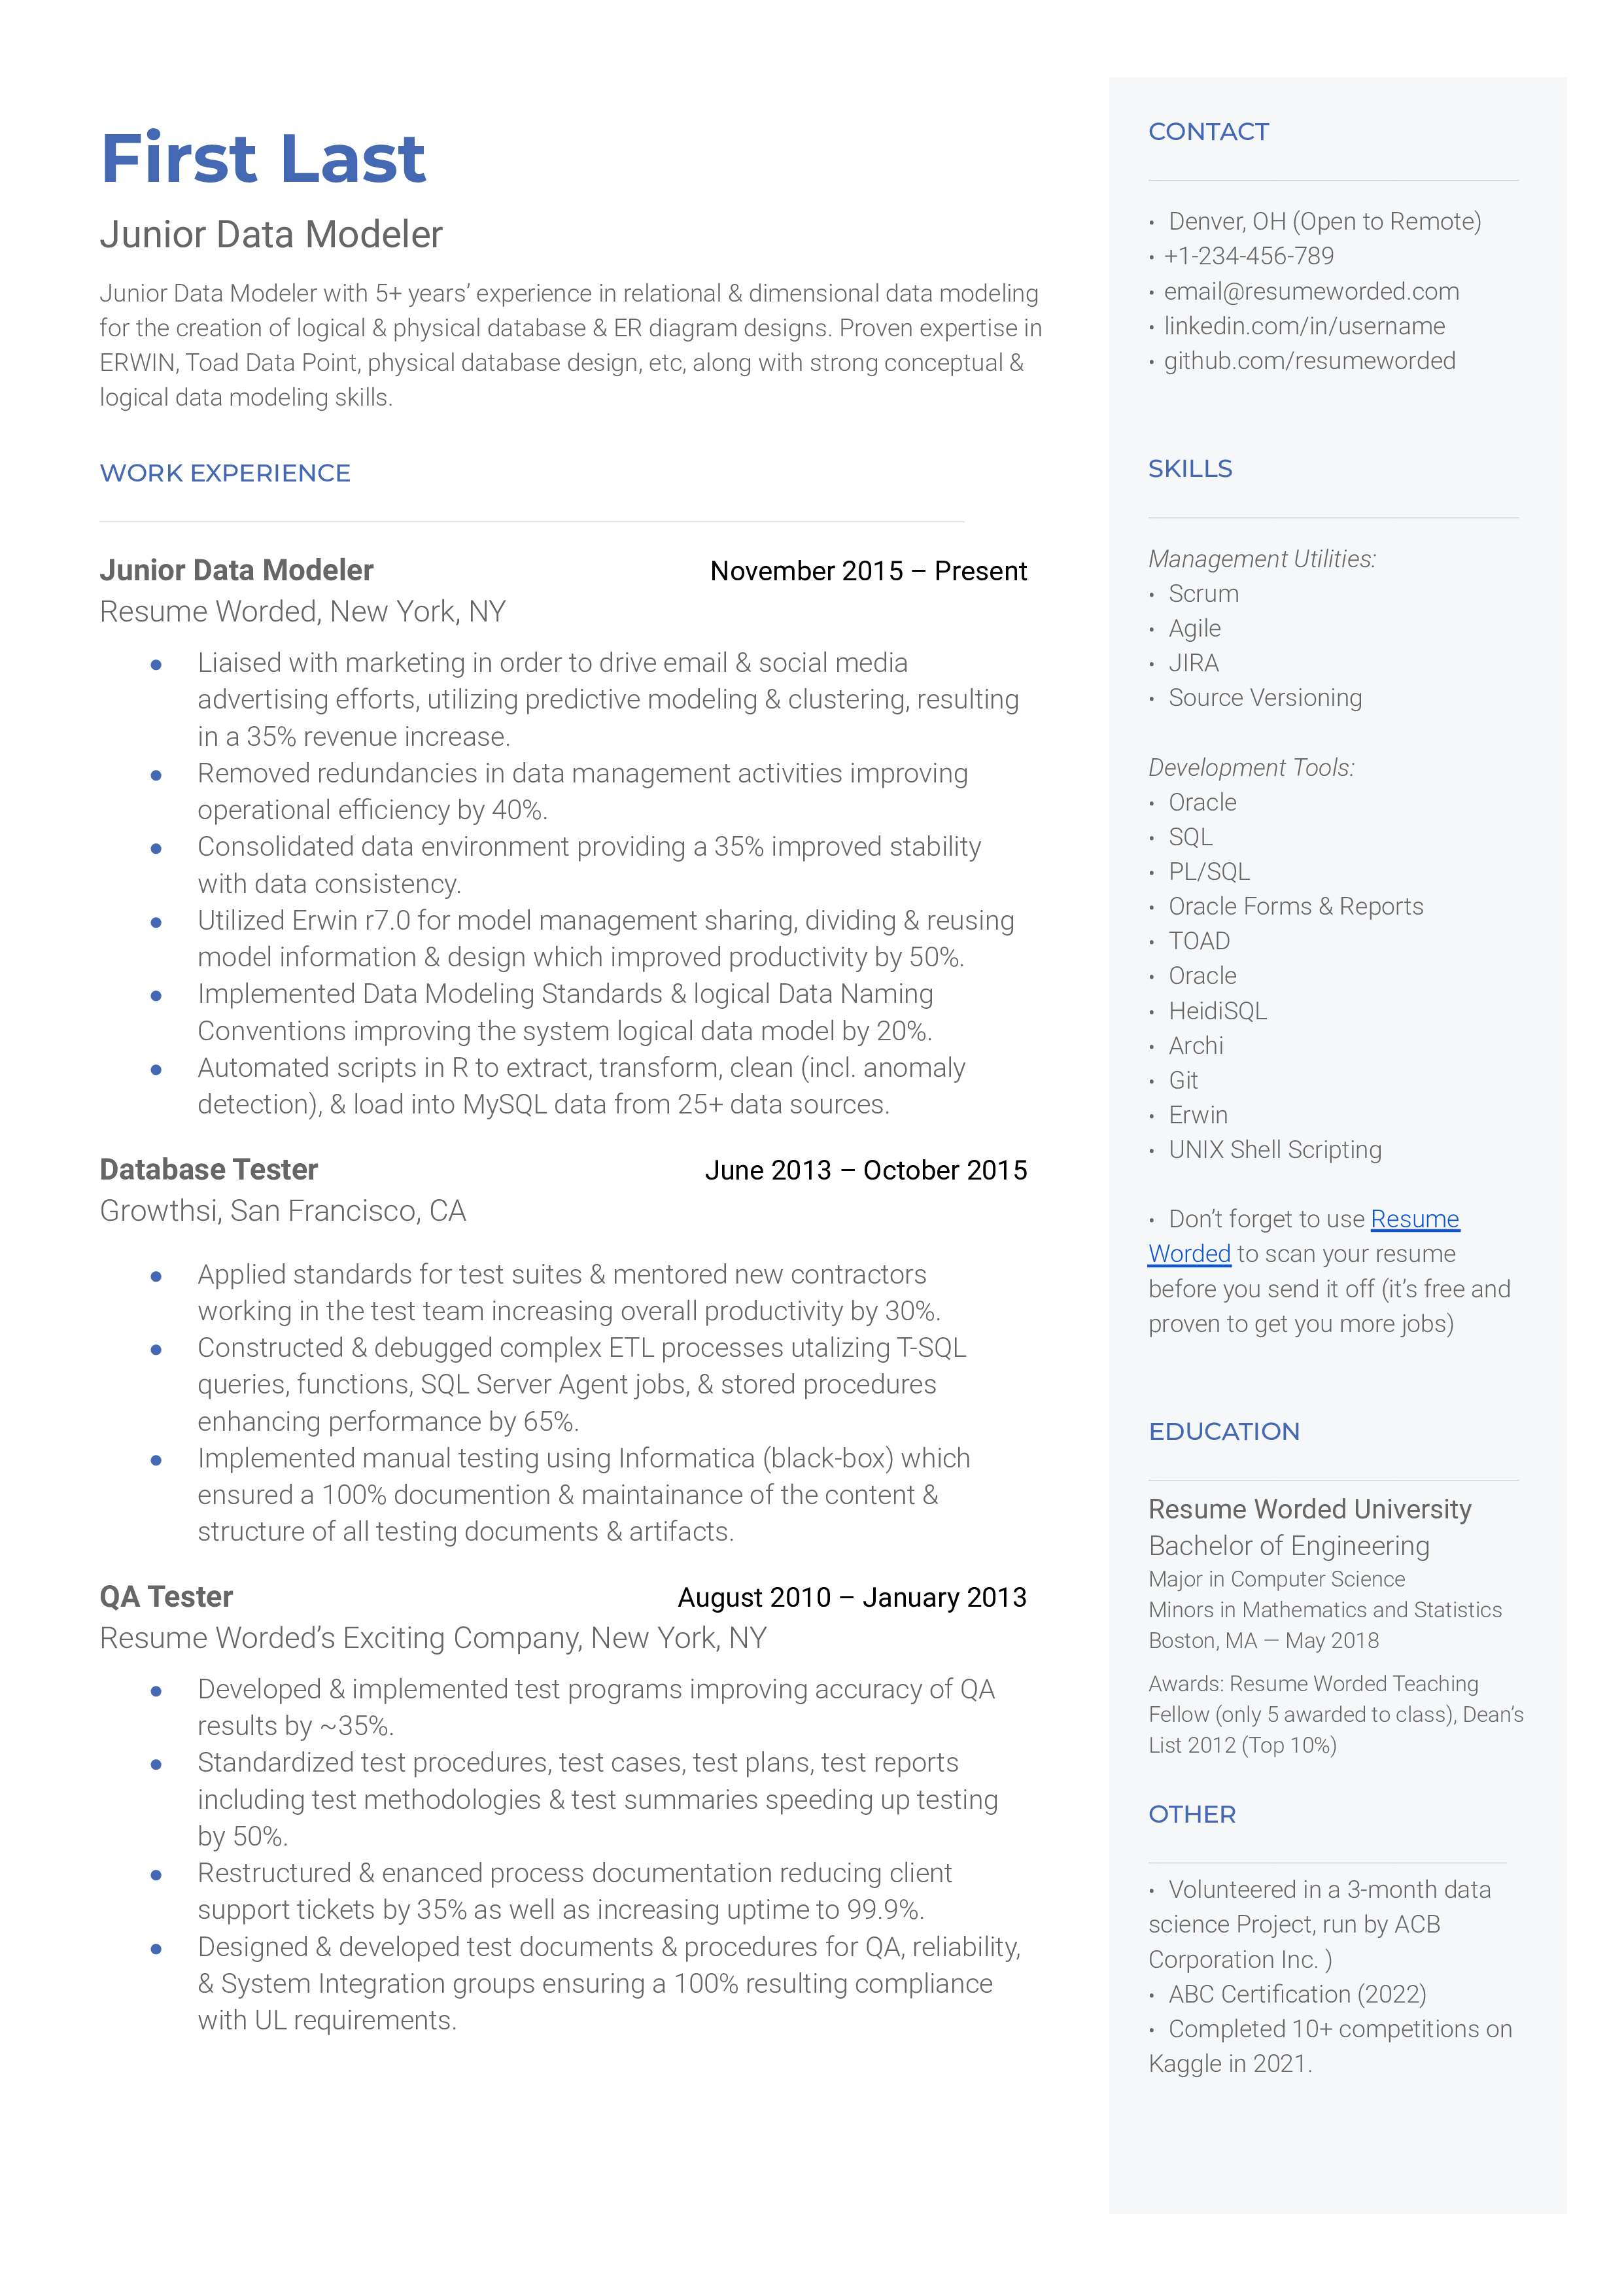 A Junior Data Modeler resume template showcasing the applicant's experience in relational & dimensional data modeliing.